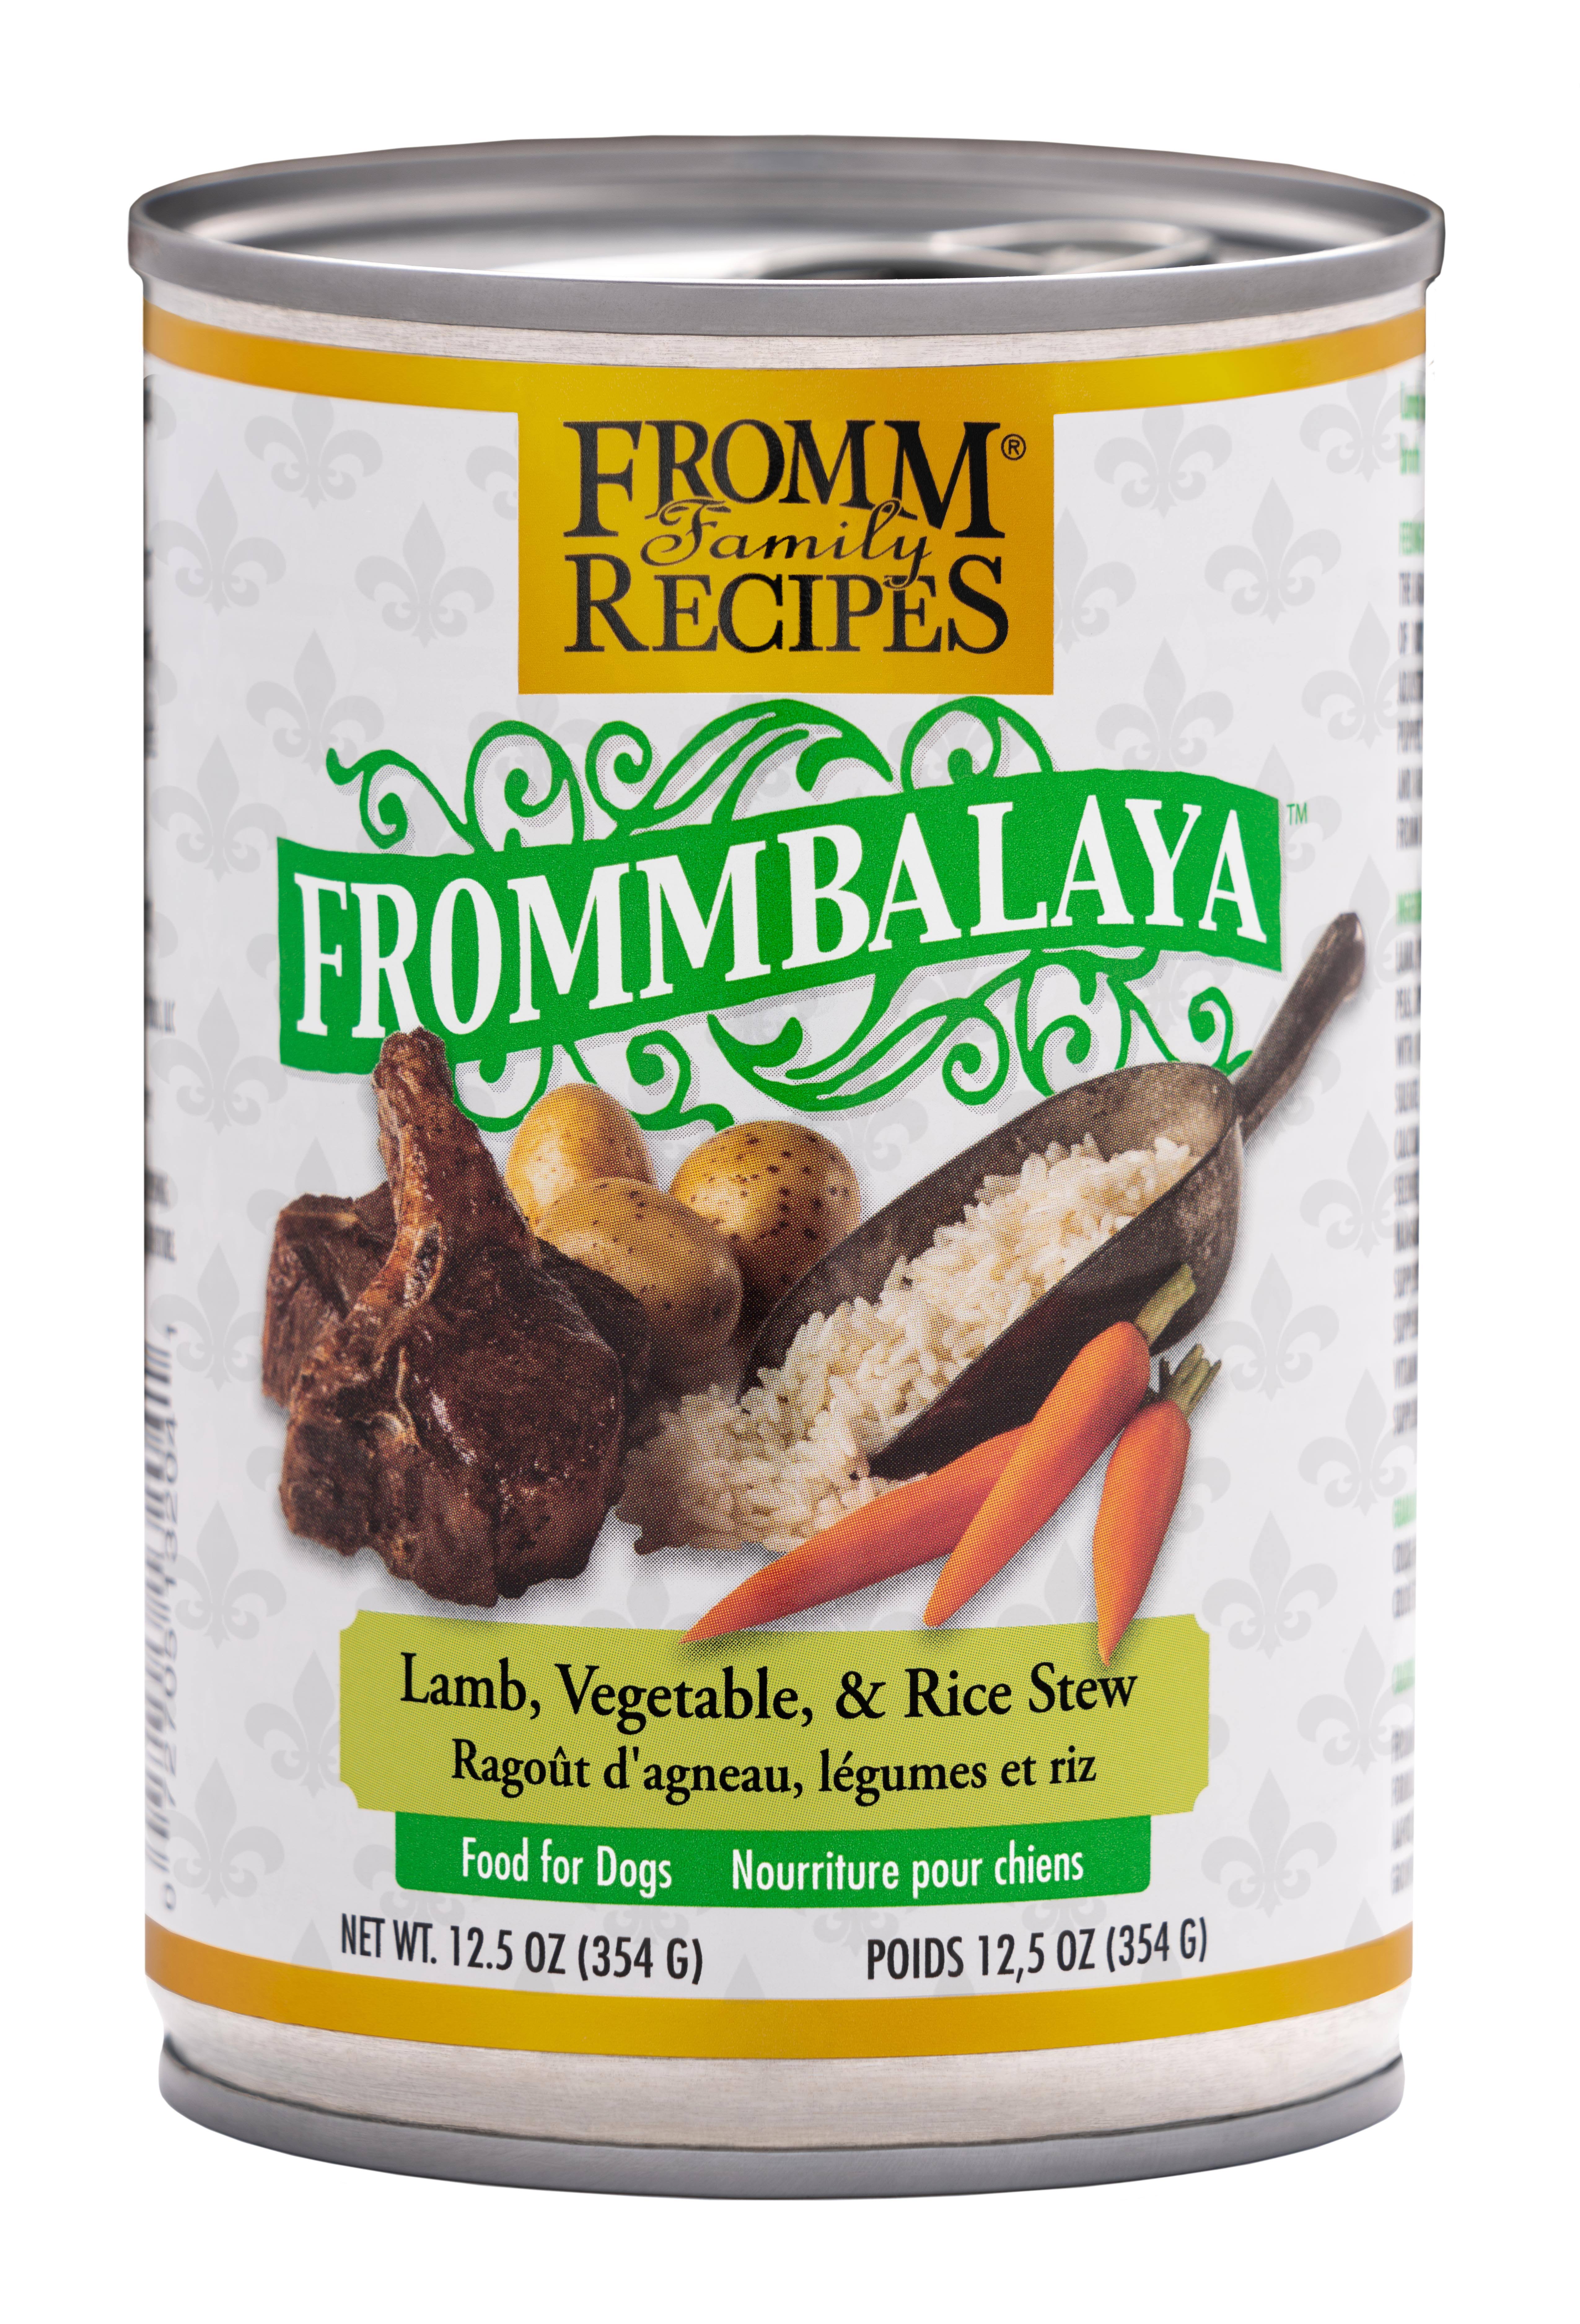 Fromm Frommbalaya Lamb, Vegetable, Rice Stew Canned Dog Food - 12.5 oz, Case of 12